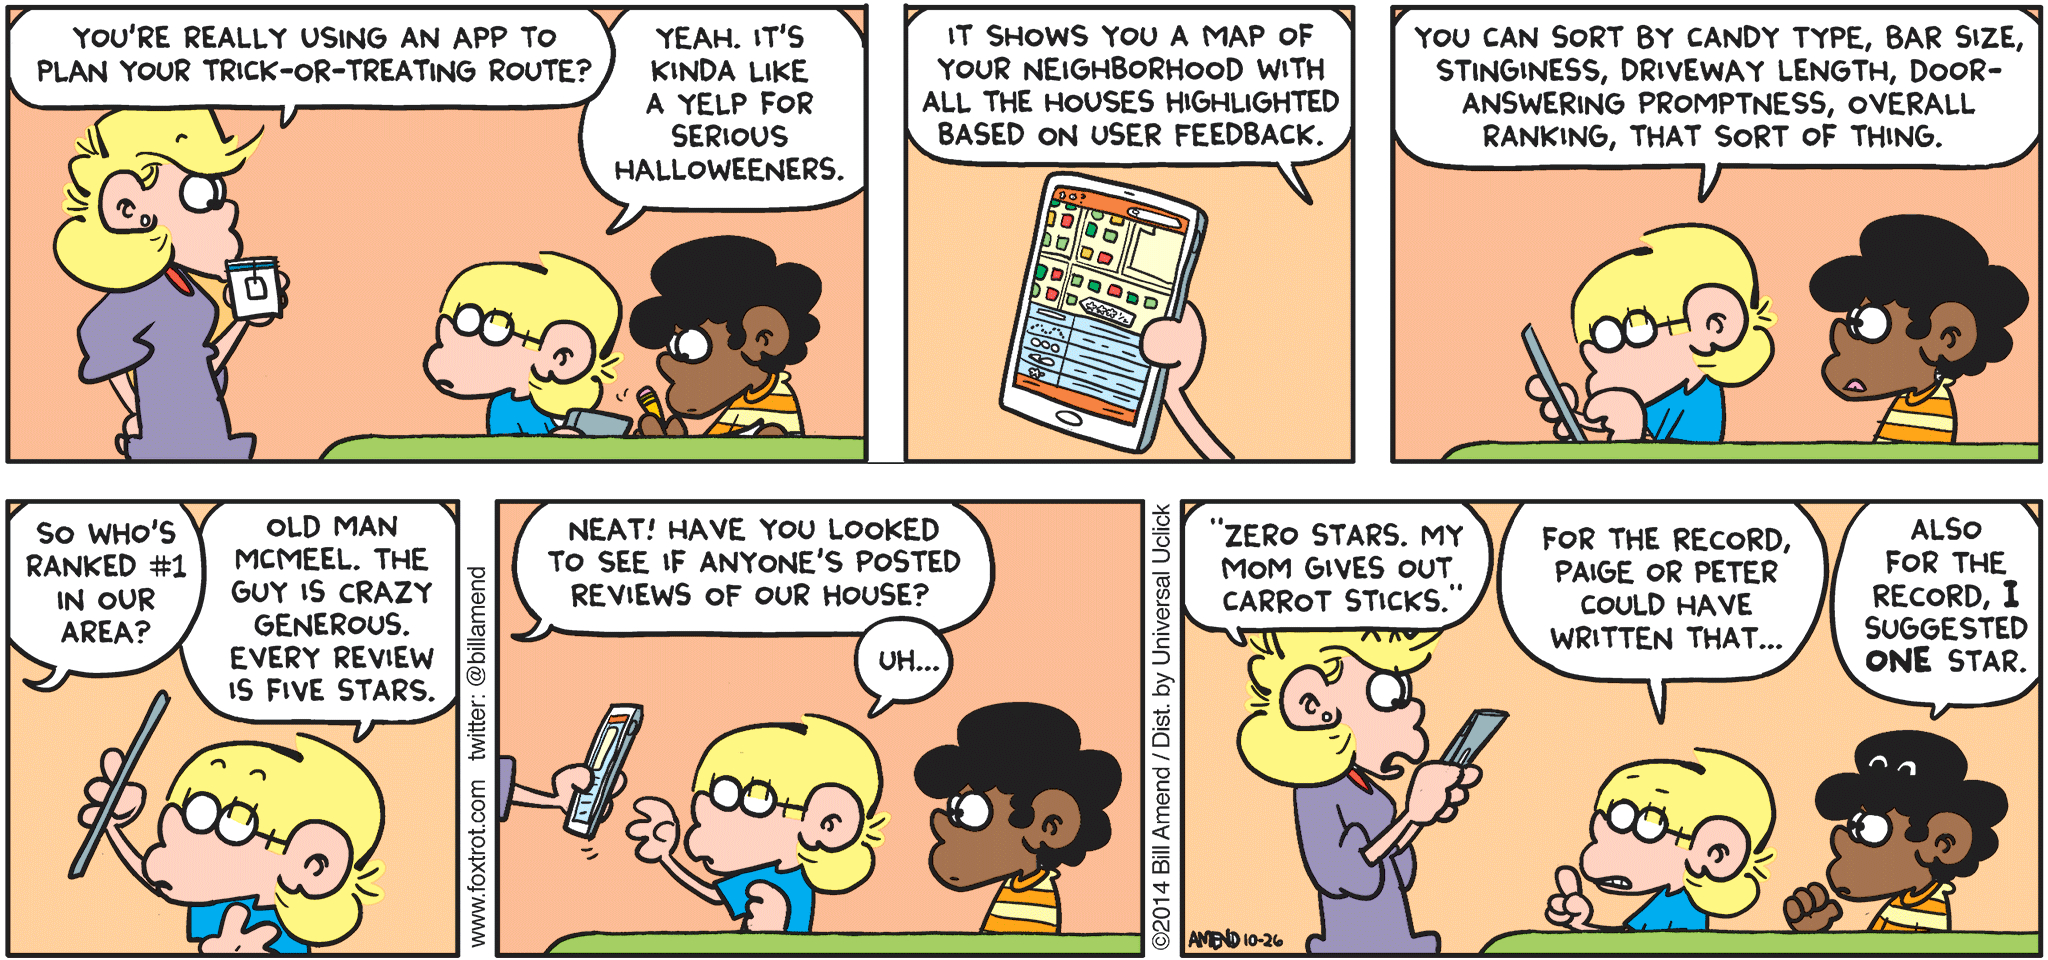 FoxTrot by Bill Amend - "Route Vegetables" published October 26, 2014 - Andy: You're really using an app to plan your trick-or-treating route? Jason: Yeah. It's kinda like a Yelp for serious Halloweeners. Jason: It shows you a map of your neighborhood with all the houses highlighted based on user feedback. You can sort by candy type, bar size, stinginess, driveway length, door-answering proptness, overall ranking, that sort of thing. Andy: So who's ranked #1 in our area? Jason: Old man McMeel. The guys is crazy generous. Every review is five stars. Andy: Neatt! Have you looked to see if anyone's posted reviews of our house? Jason: Uh... Andy: "Zero stars. My mom gives out carrot sticks." Jason: For the record, Paige or Peter could have written that... Marcus: Also for the record, I suggested ONE star.